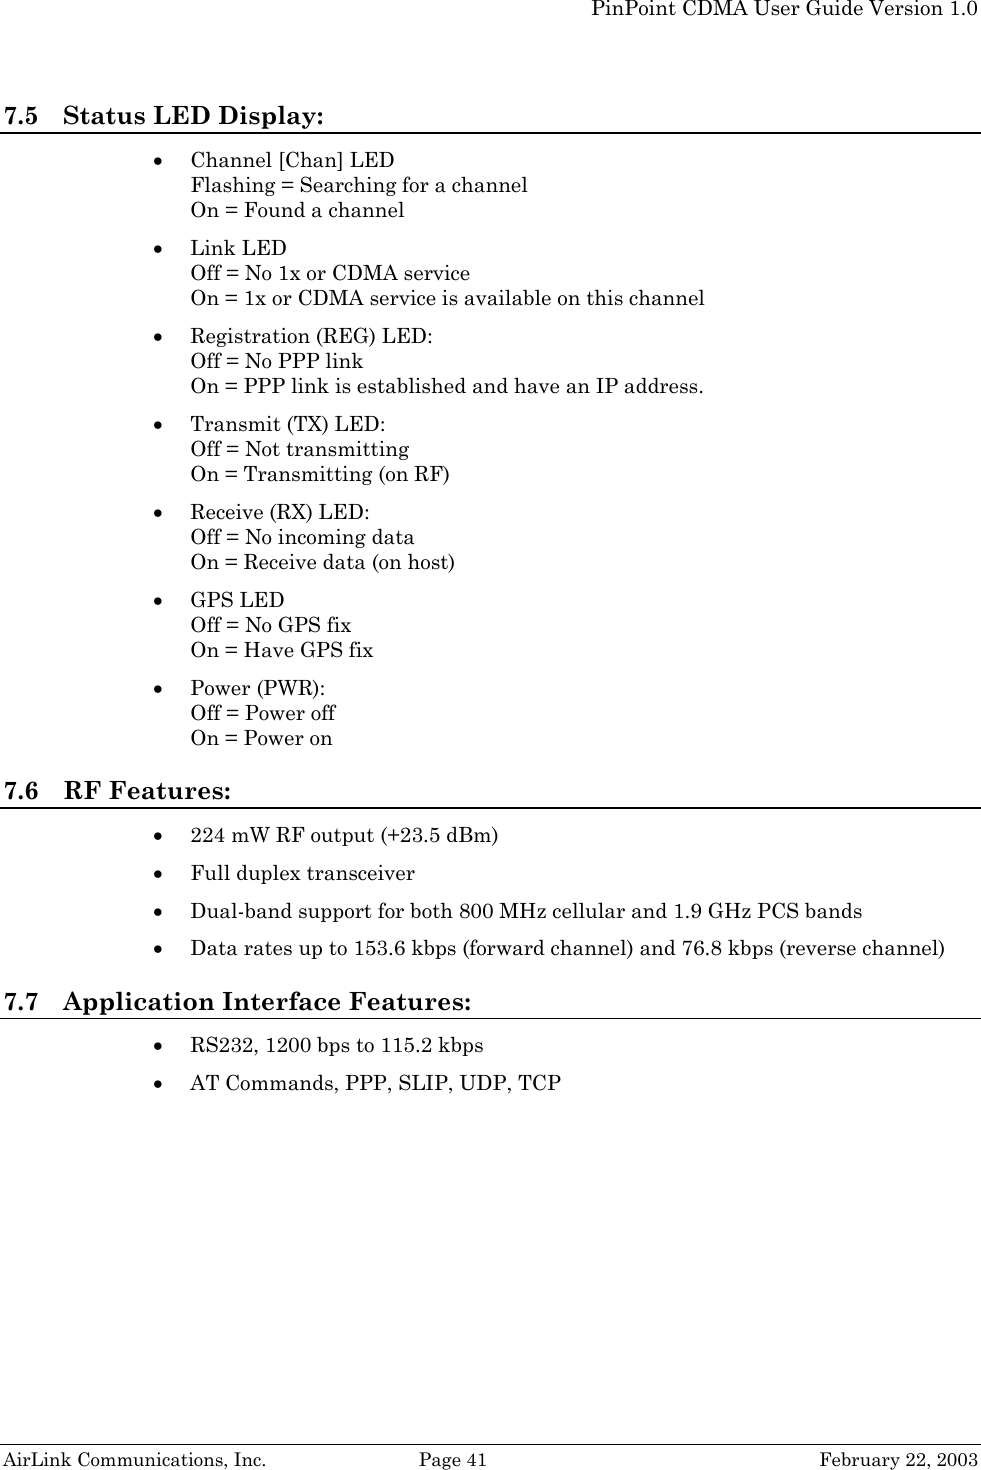   PinPoint CDMA User Guide Version 1.0   AirLink Communications, Inc.  Page 41  February 22, 2003 7.5 Status LED Display: • Channel [Chan] LED Flashing = Searching for a channel On = Found a channel • Link LED Off = No 1x or CDMA service On = 1x or CDMA service is available on this channel • Registration (REG) LED: Off = No PPP link  On = PPP link is established and have an IP address. • Transmit (TX) LED: Off = Not transmitting On = Transmitting (on RF) • Receive (RX) LED: Off = No incoming data On = Receive data (on host) • GPS LED Off = No GPS fix On = Have GPS fix • Power (PWR): Off = Power off On = Power on 7.6 RF Features: • 224 mW RF output (+23.5 dBm) • Full duplex transceiver • Dual-band support for both 800 MHz cellular and 1.9 GHz PCS bands • Data rates up to 153.6 kbps (forward channel) and 76.8 kbps (reverse channel) 7.7 Application Interface Features: • RS232, 1200 bps to 115.2 kbps • AT Commands, PPP, SLIP, UDP, TCP 